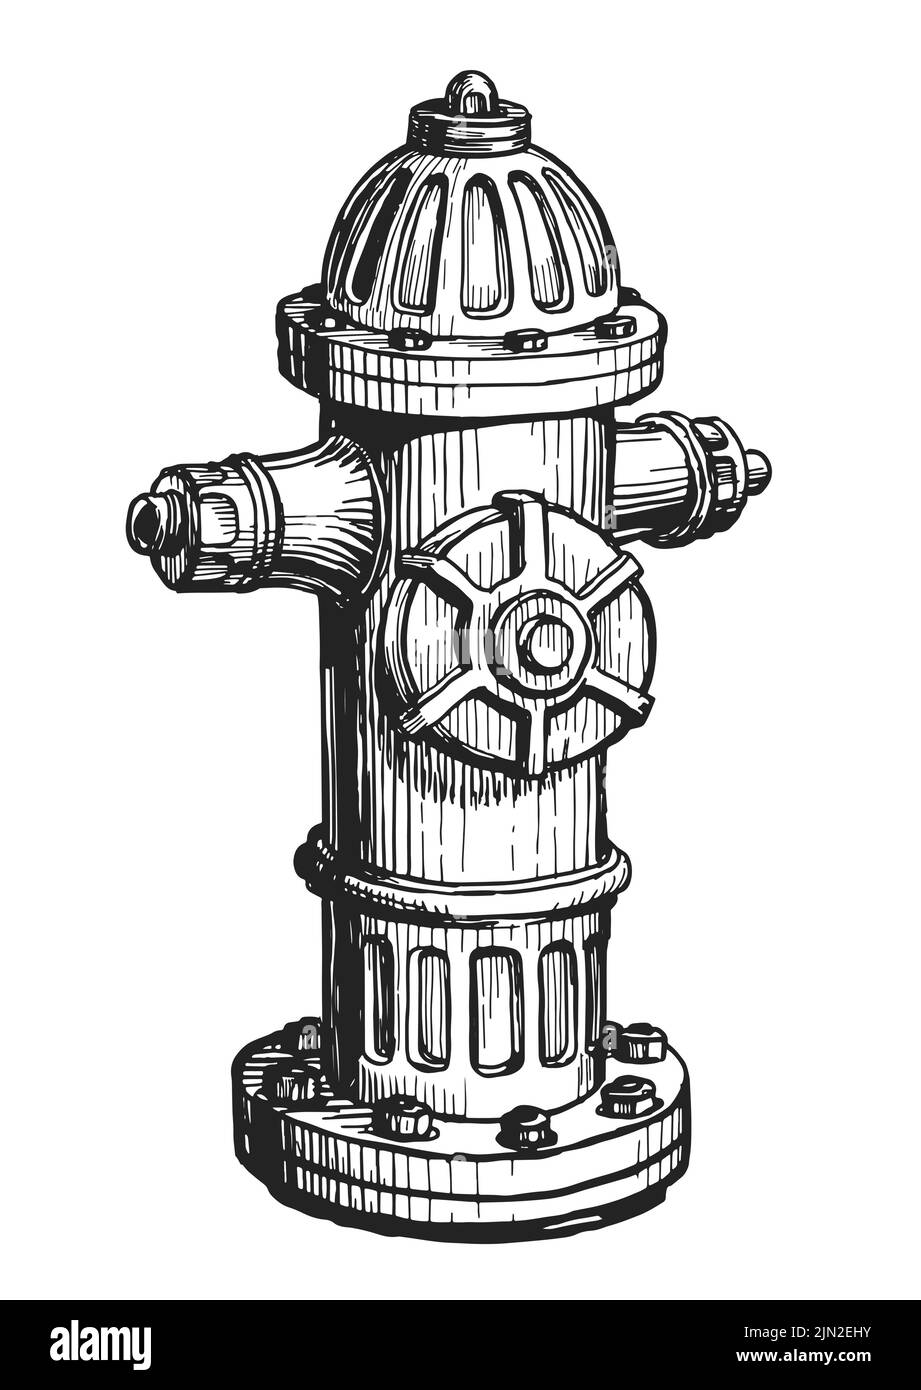 Fire hydrant isolated. Firefighter equipment vector illustration. Hand drawn sketch in vintage engraving style Stock Vector